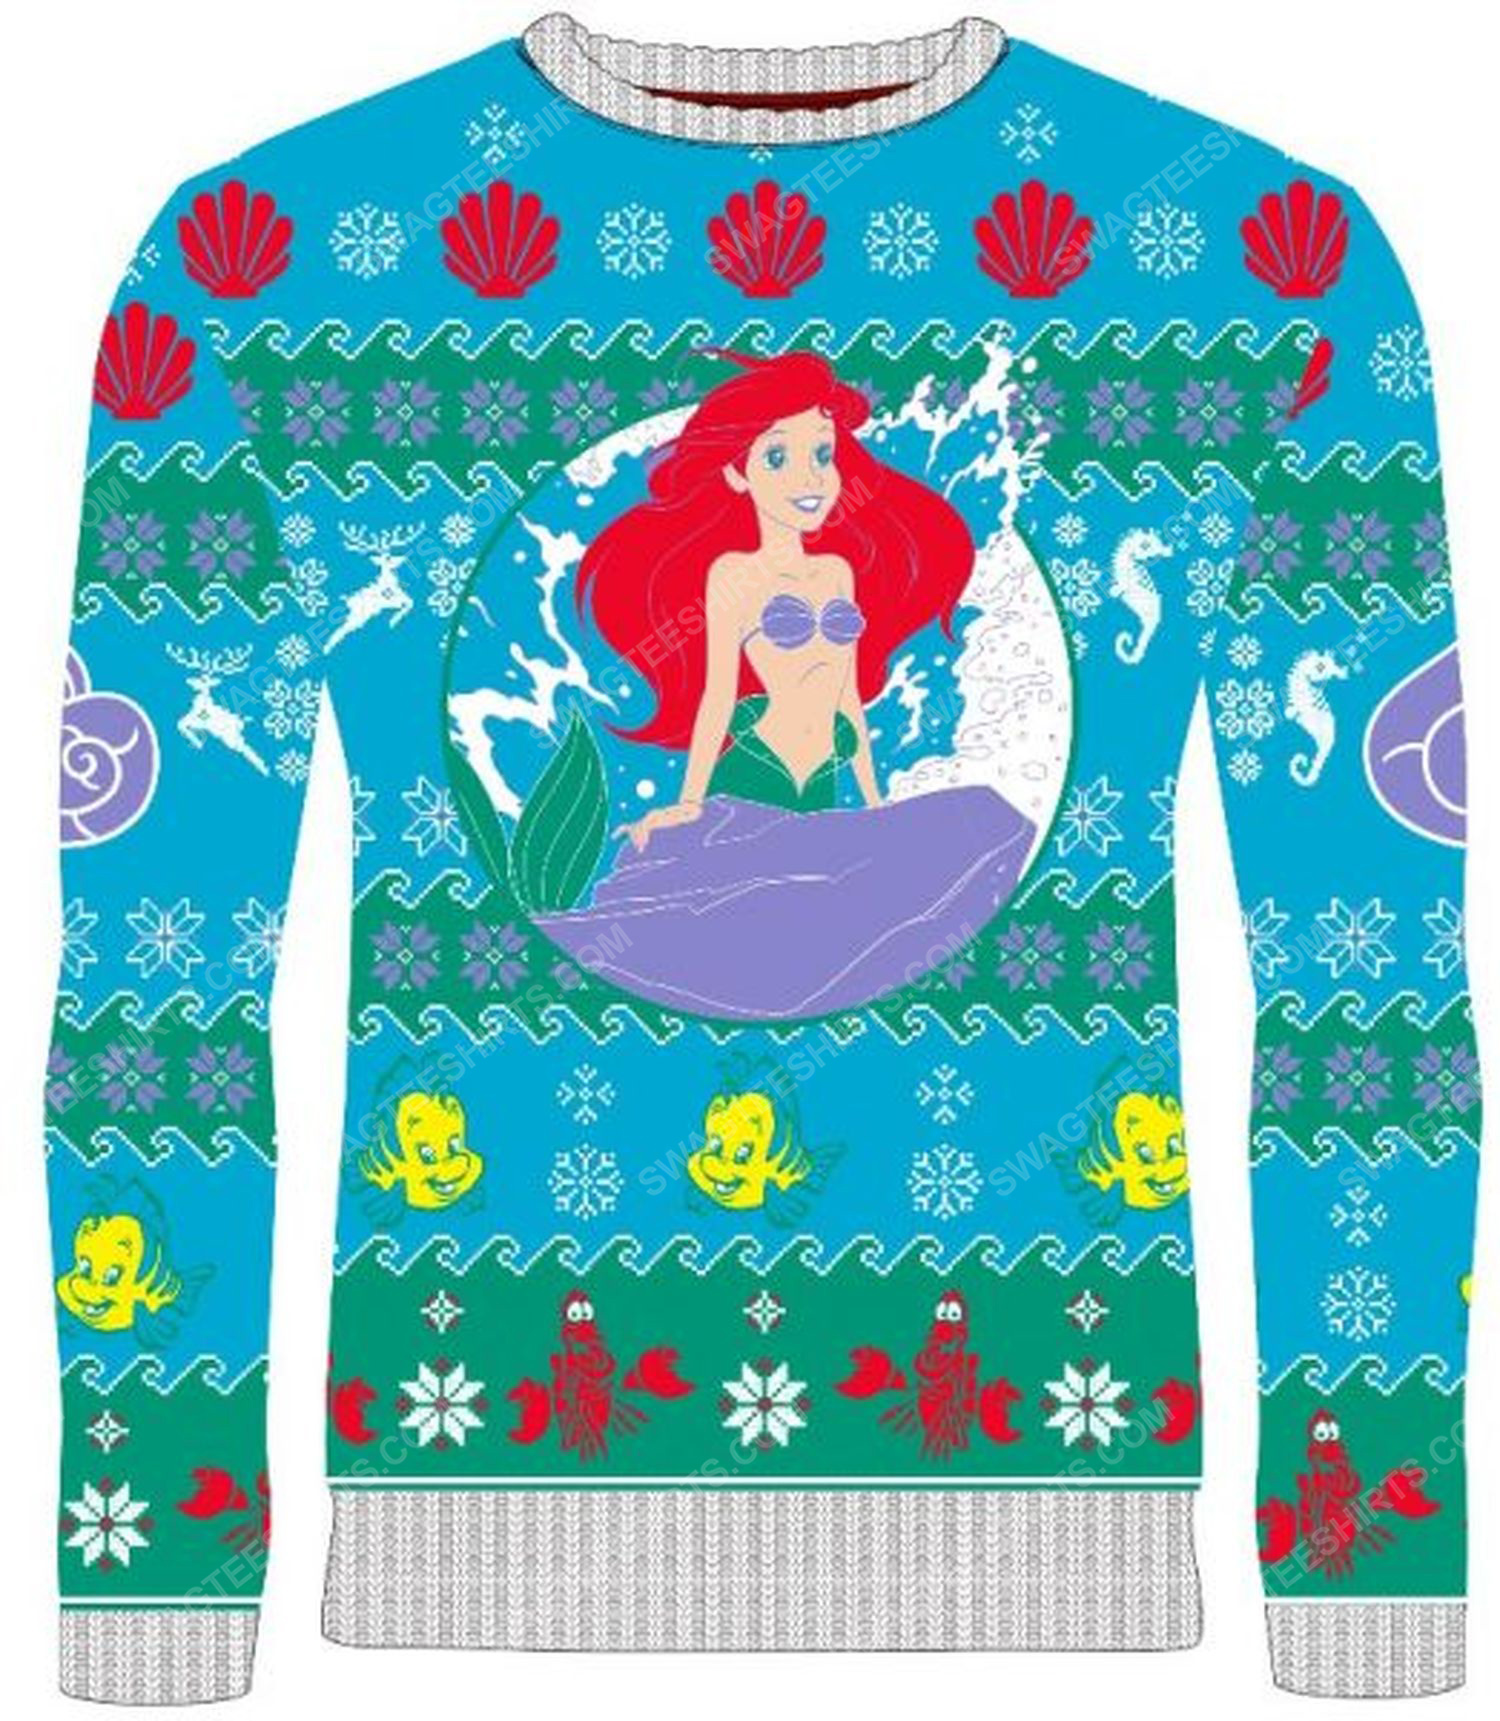 [special edition] Christmas holiday the little mermaid full print ugly christmas sweater – maria